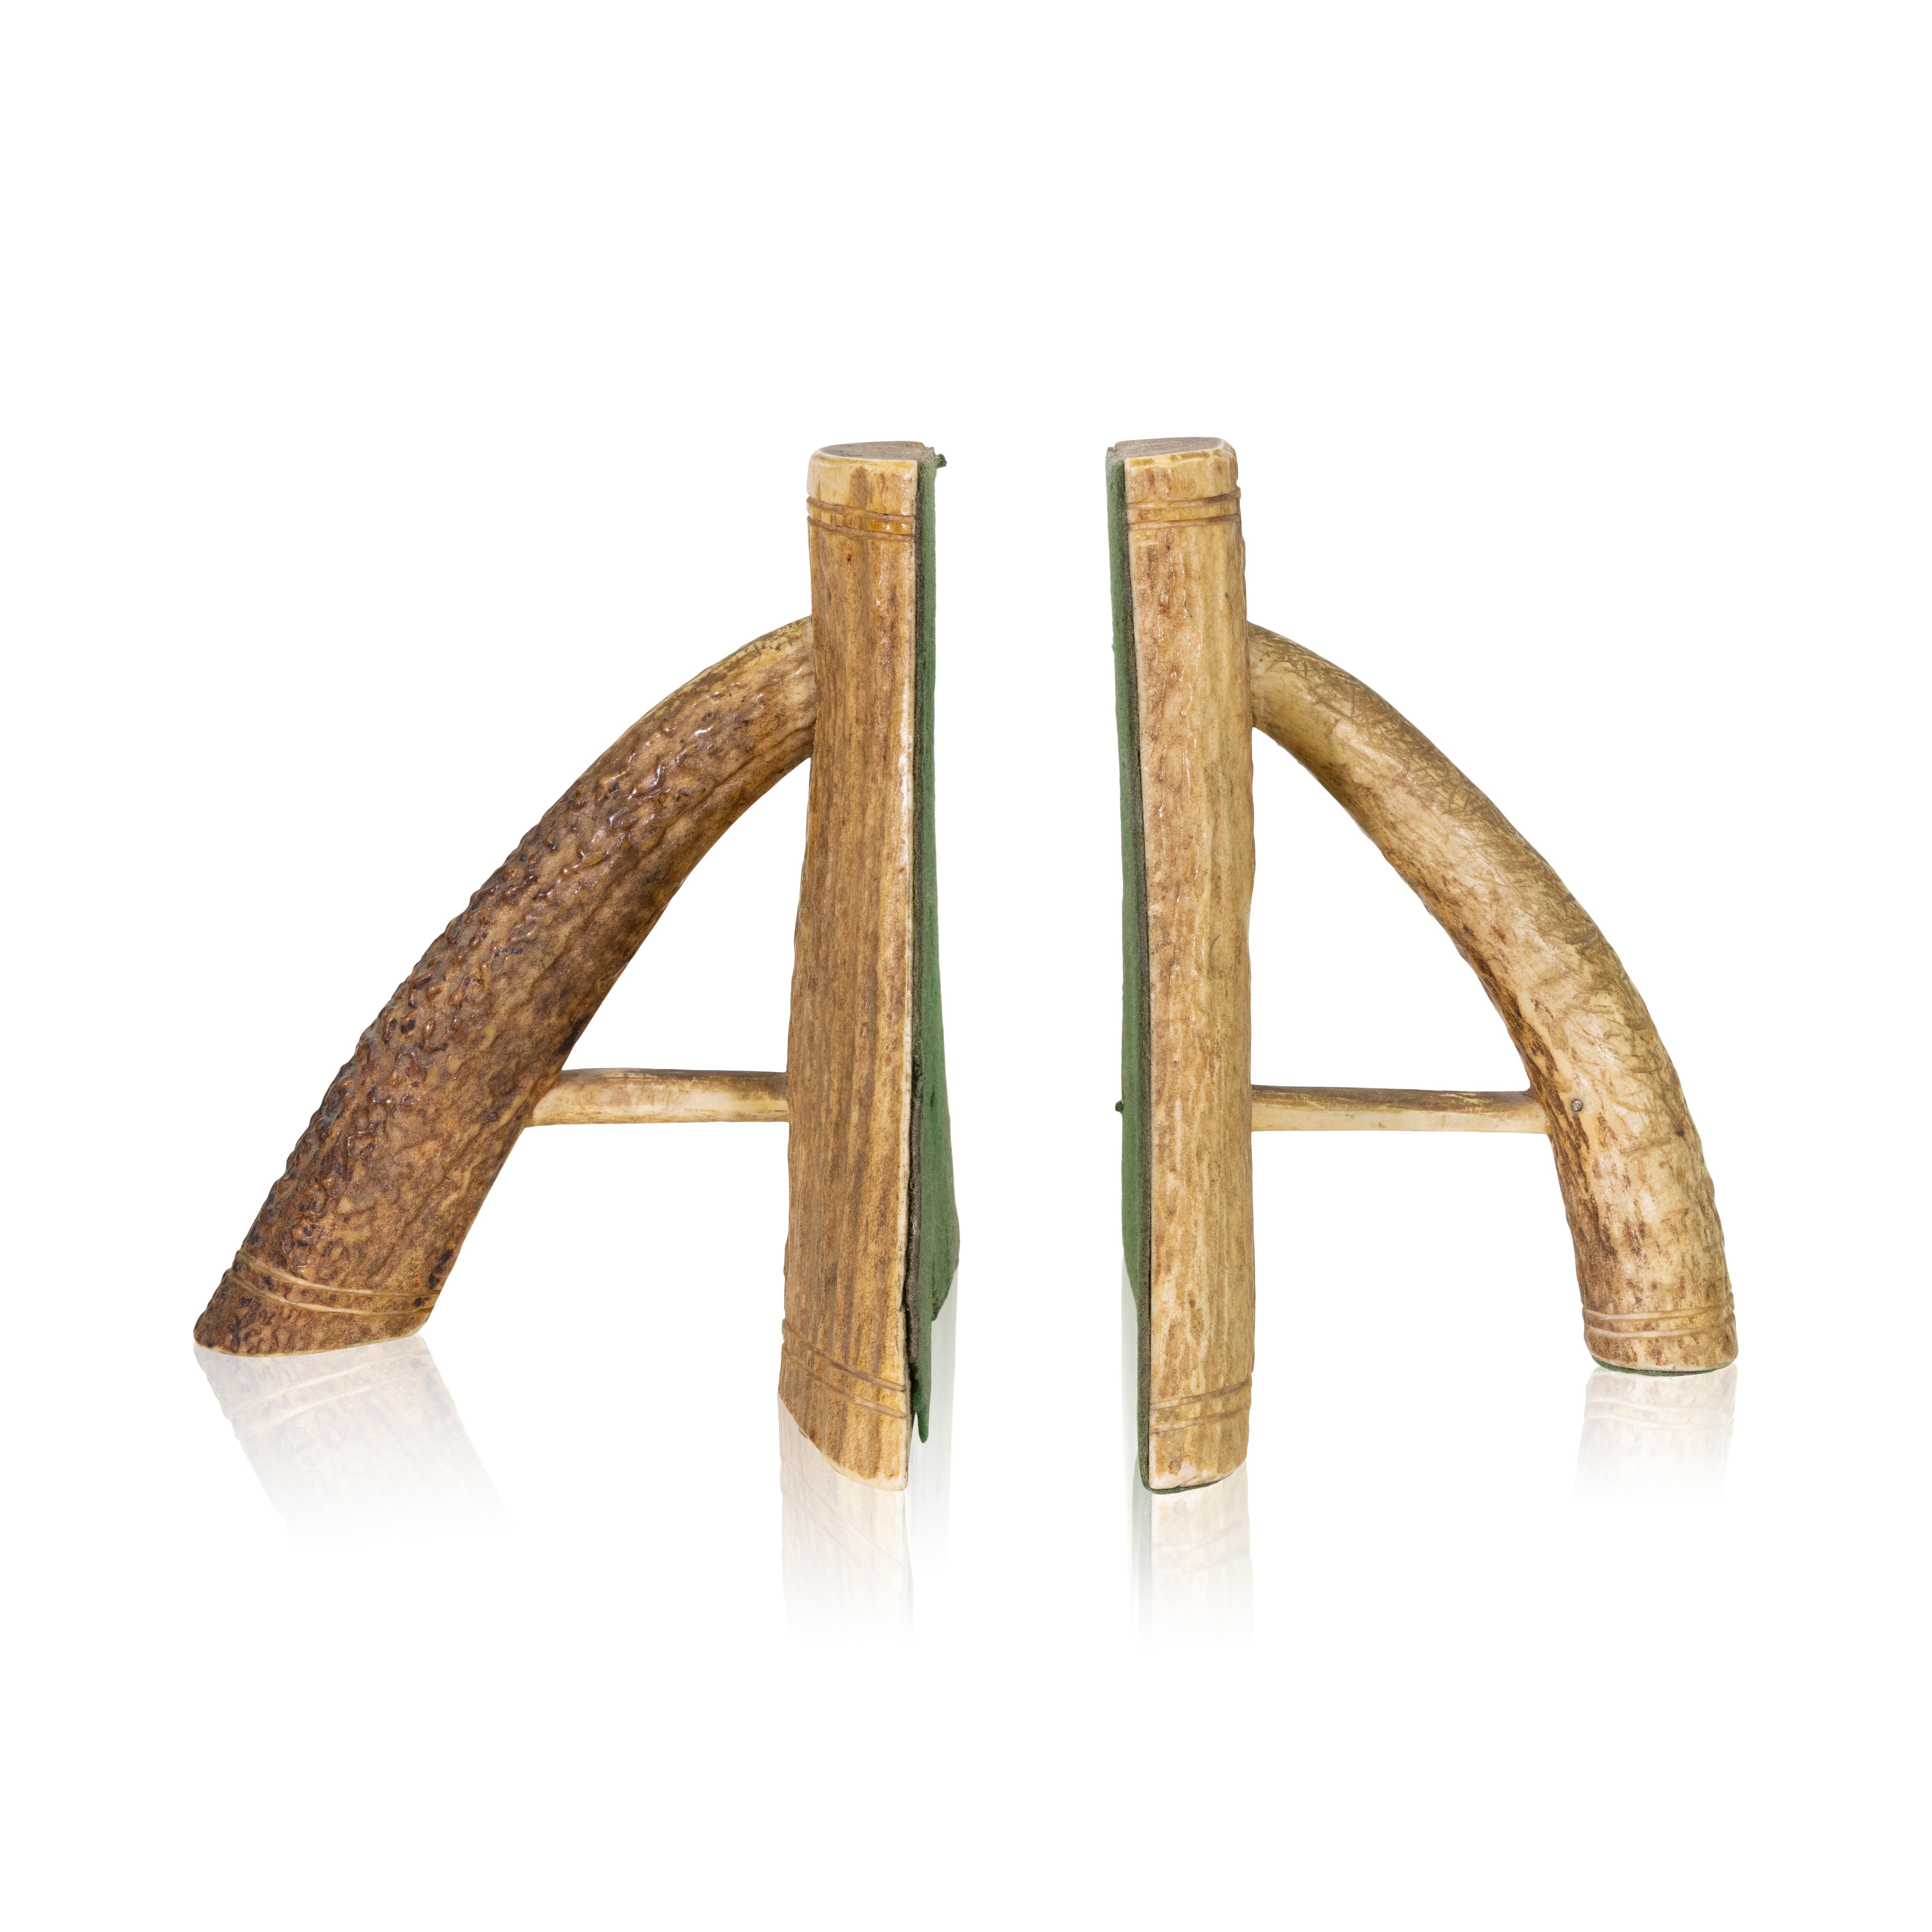 Moose antler bookends or candle holders from Wyoming. Goes great with our other antler furniture and accessories. 

Period: First quarter 20th Century

Origin: United States, Wyoming

Size: 5